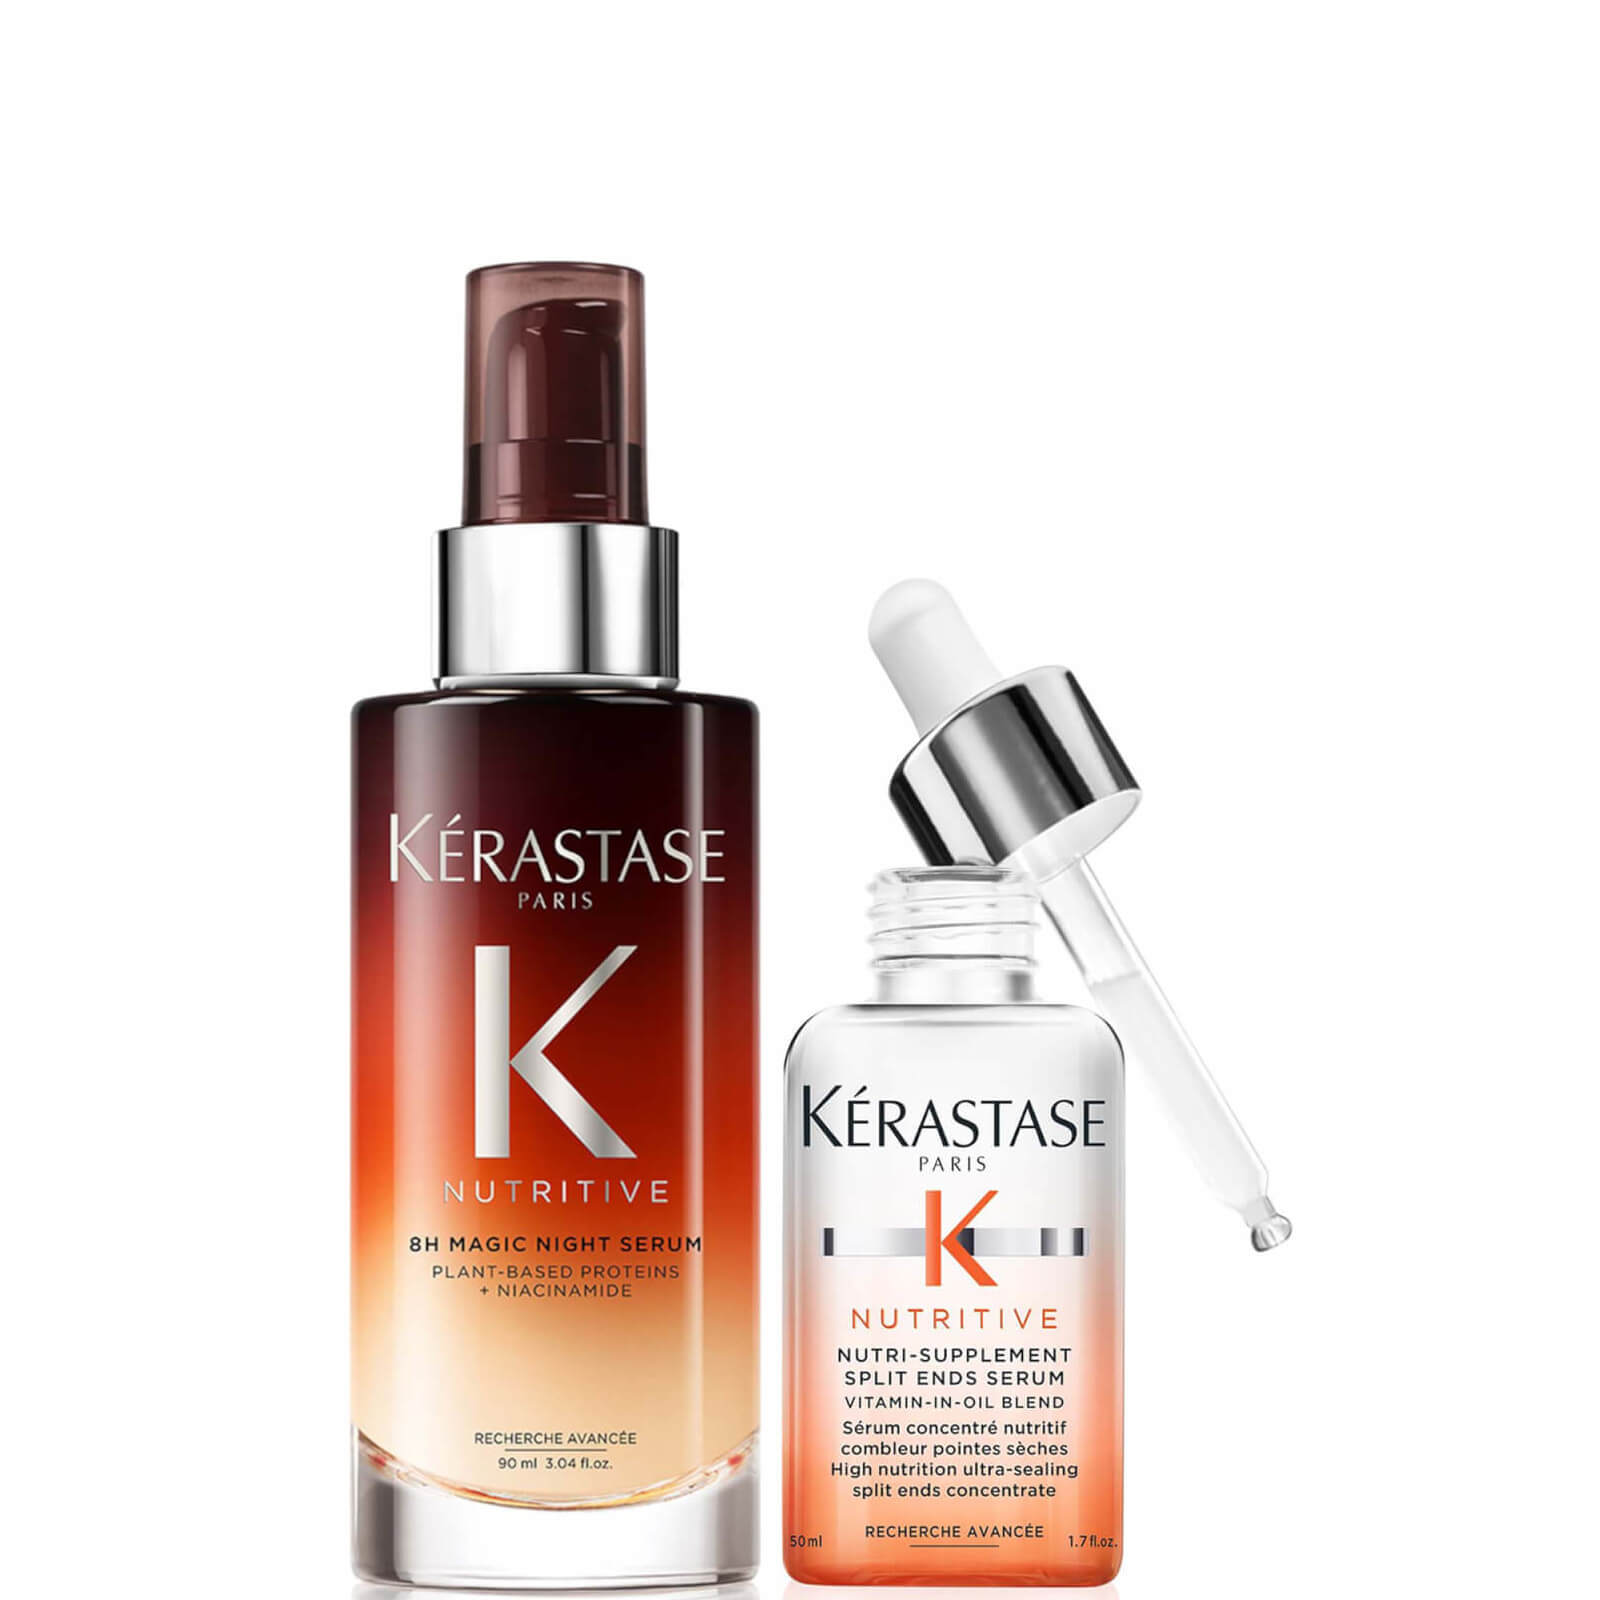 Kerastase Nutritive Nourishment Boosters Duo for Dry Hair